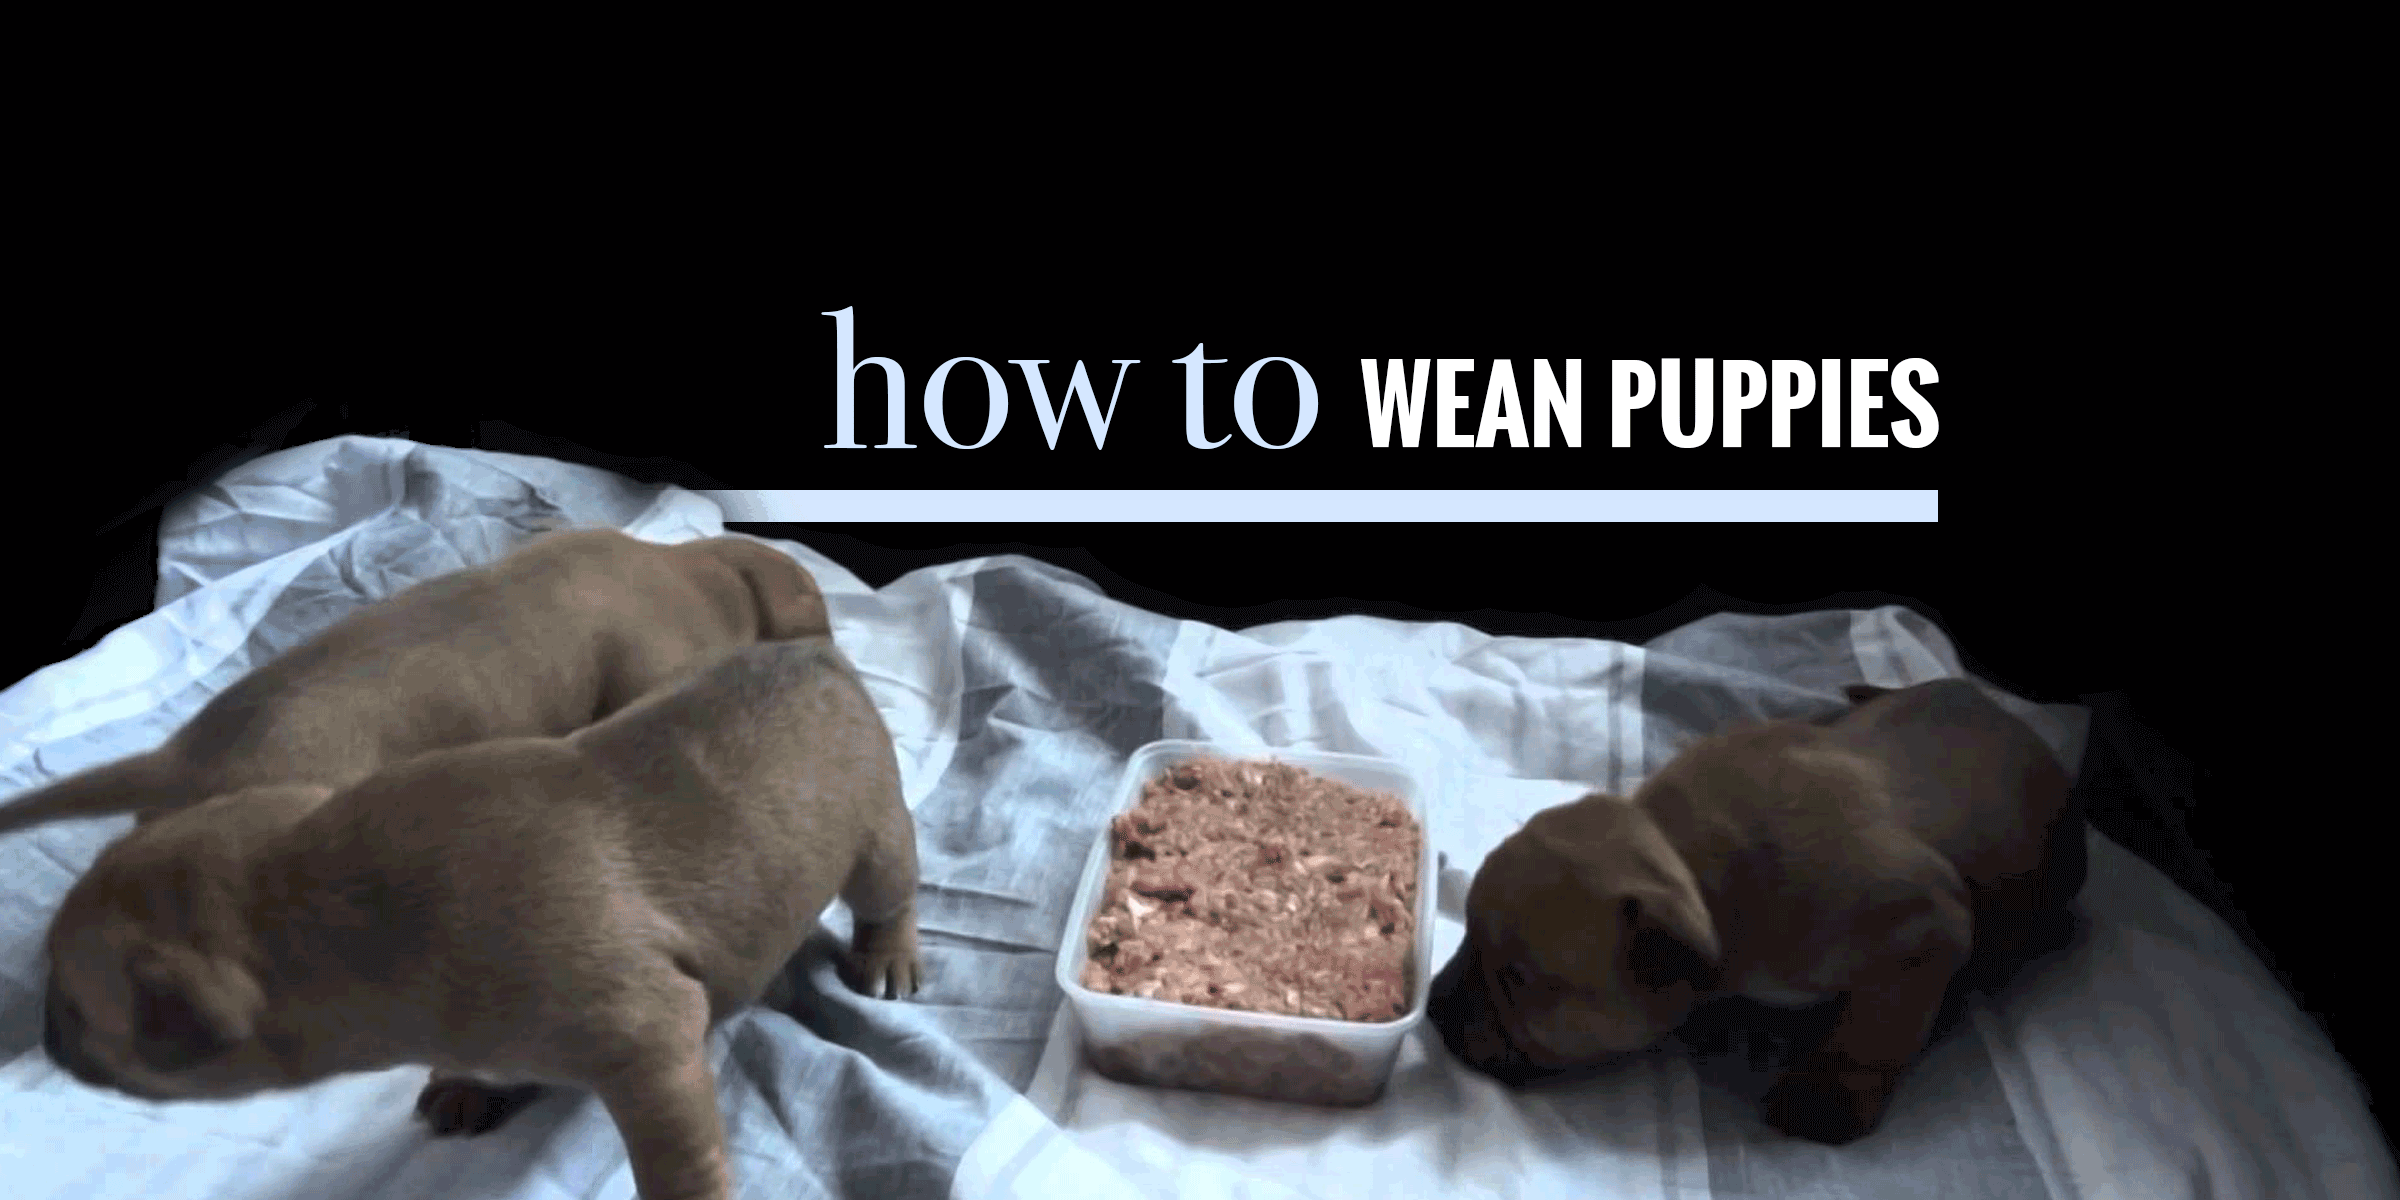 when can puppies eat food and drink water